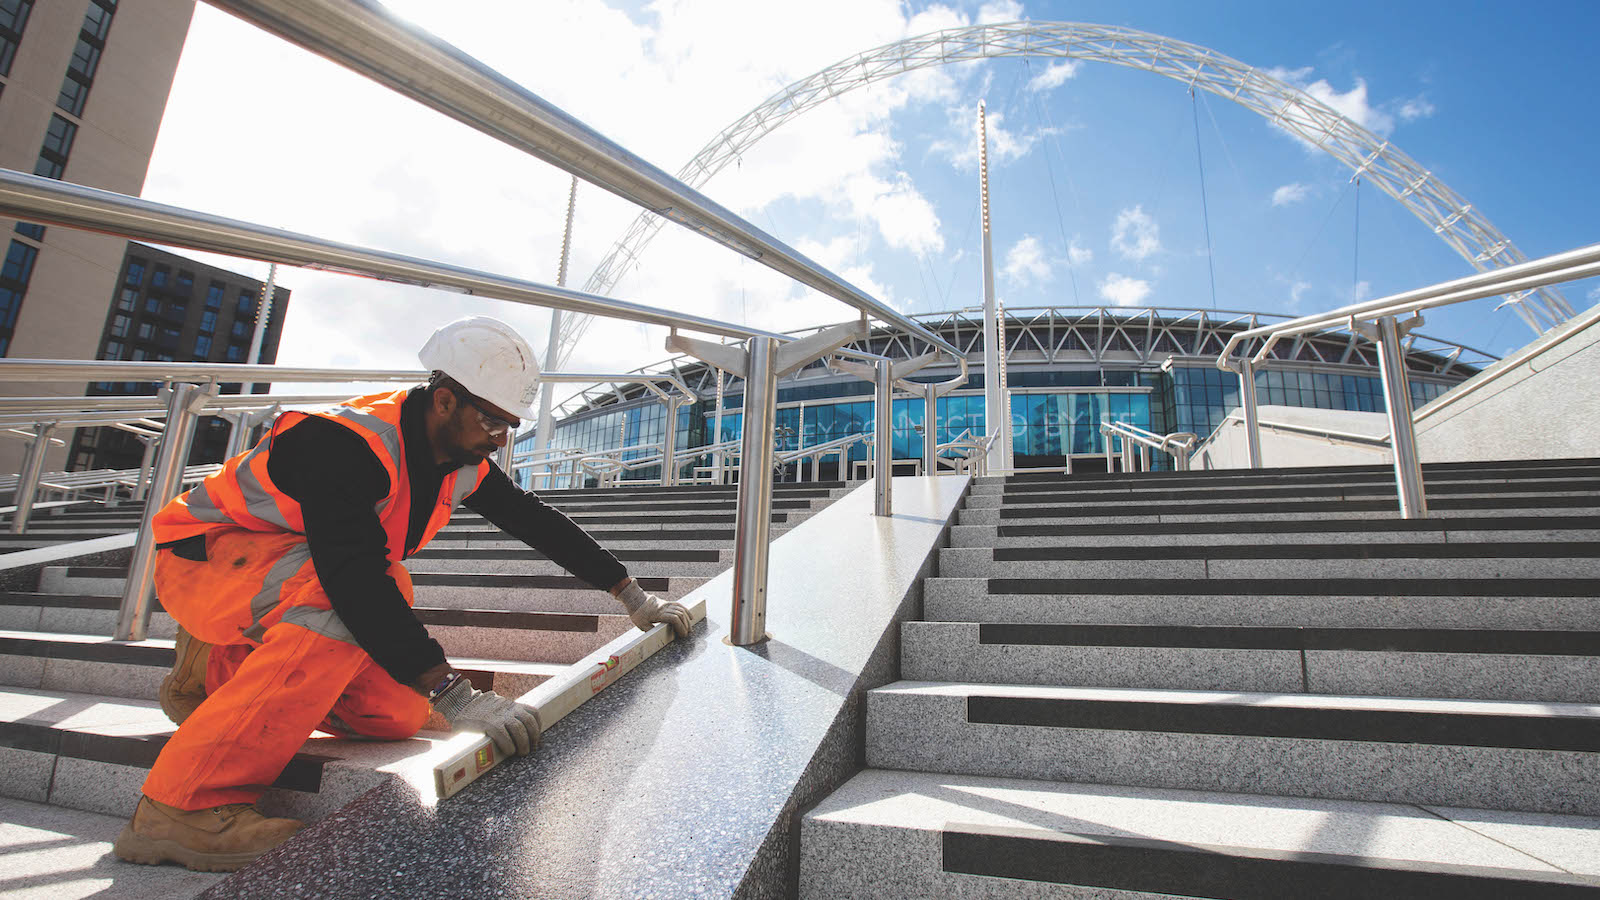 Construction workers make finishing touches to the newly installed Olympic Steps at Wembley Park in London, as part of an area-wide upgrade to the Wembley Park destination. Photo credit: David Parry/PA Wire